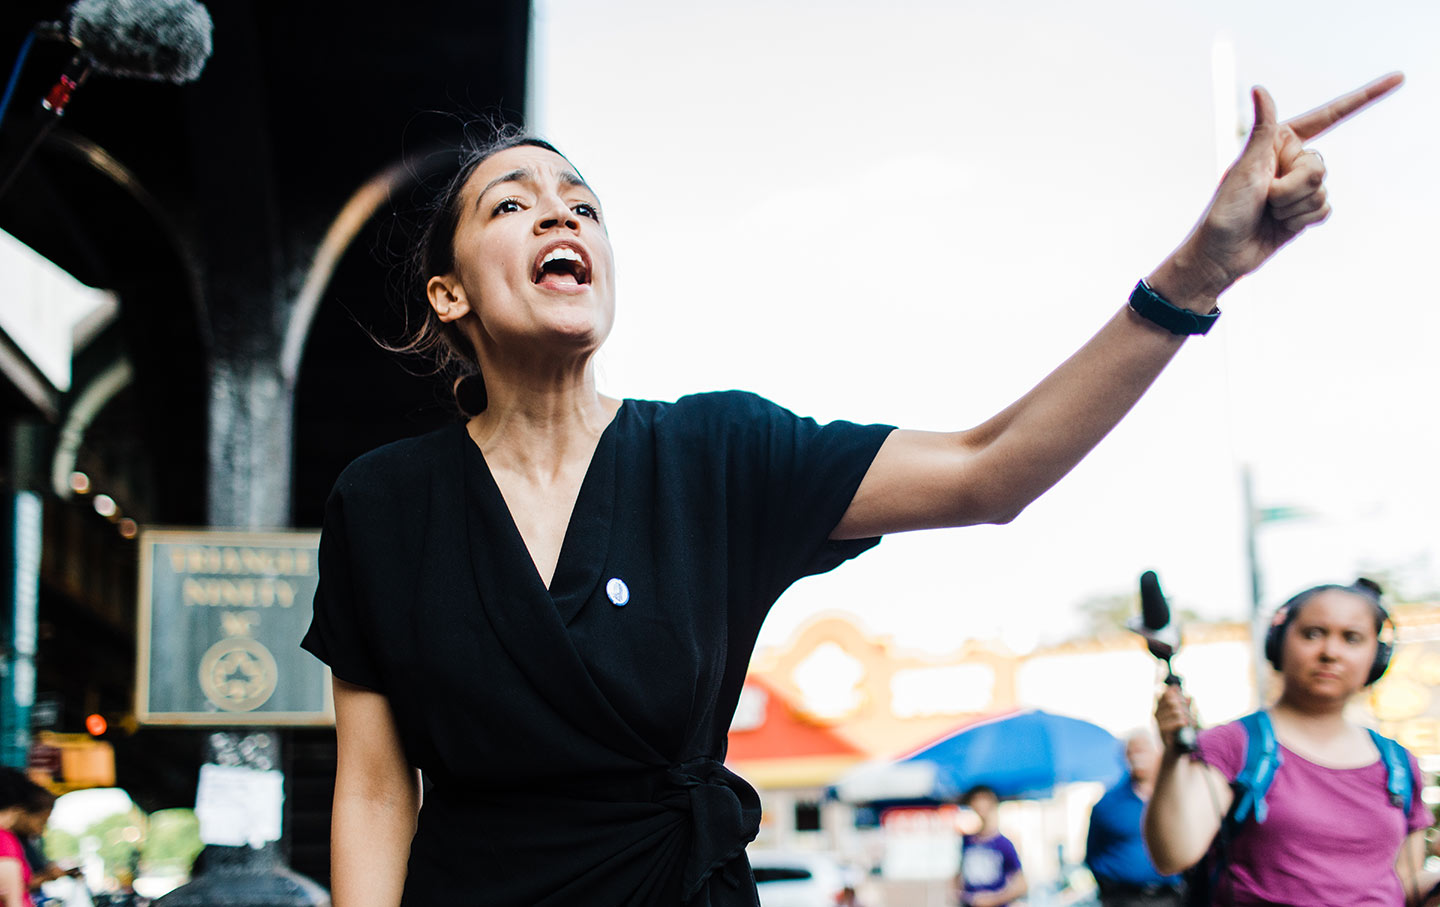 Image: AOC has a nervous breakdown after New Yorkers chant “AOC has got to go”